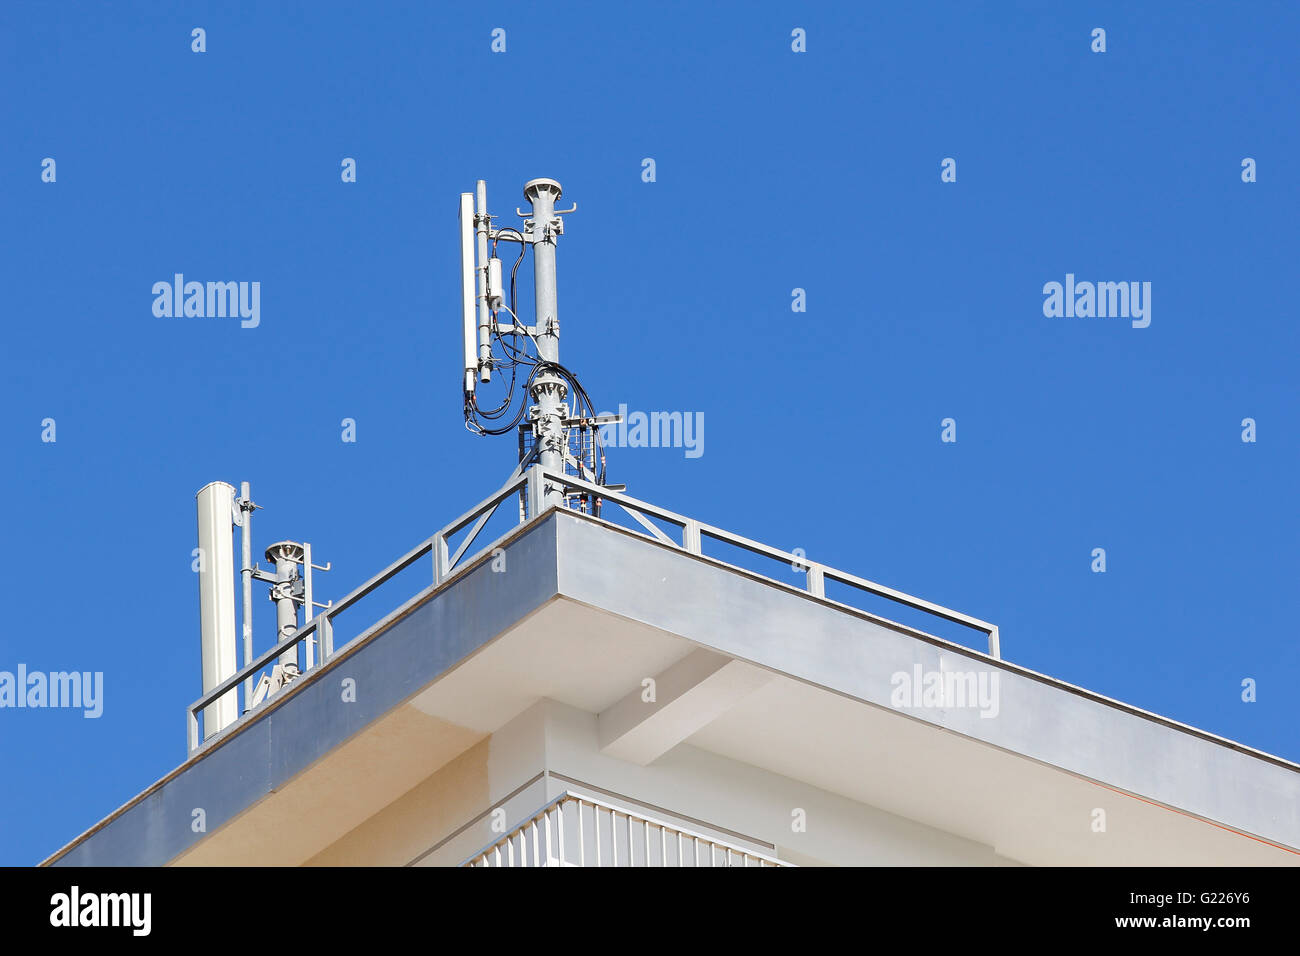 Mobile antenna in a building, against blue sky Stock Photo